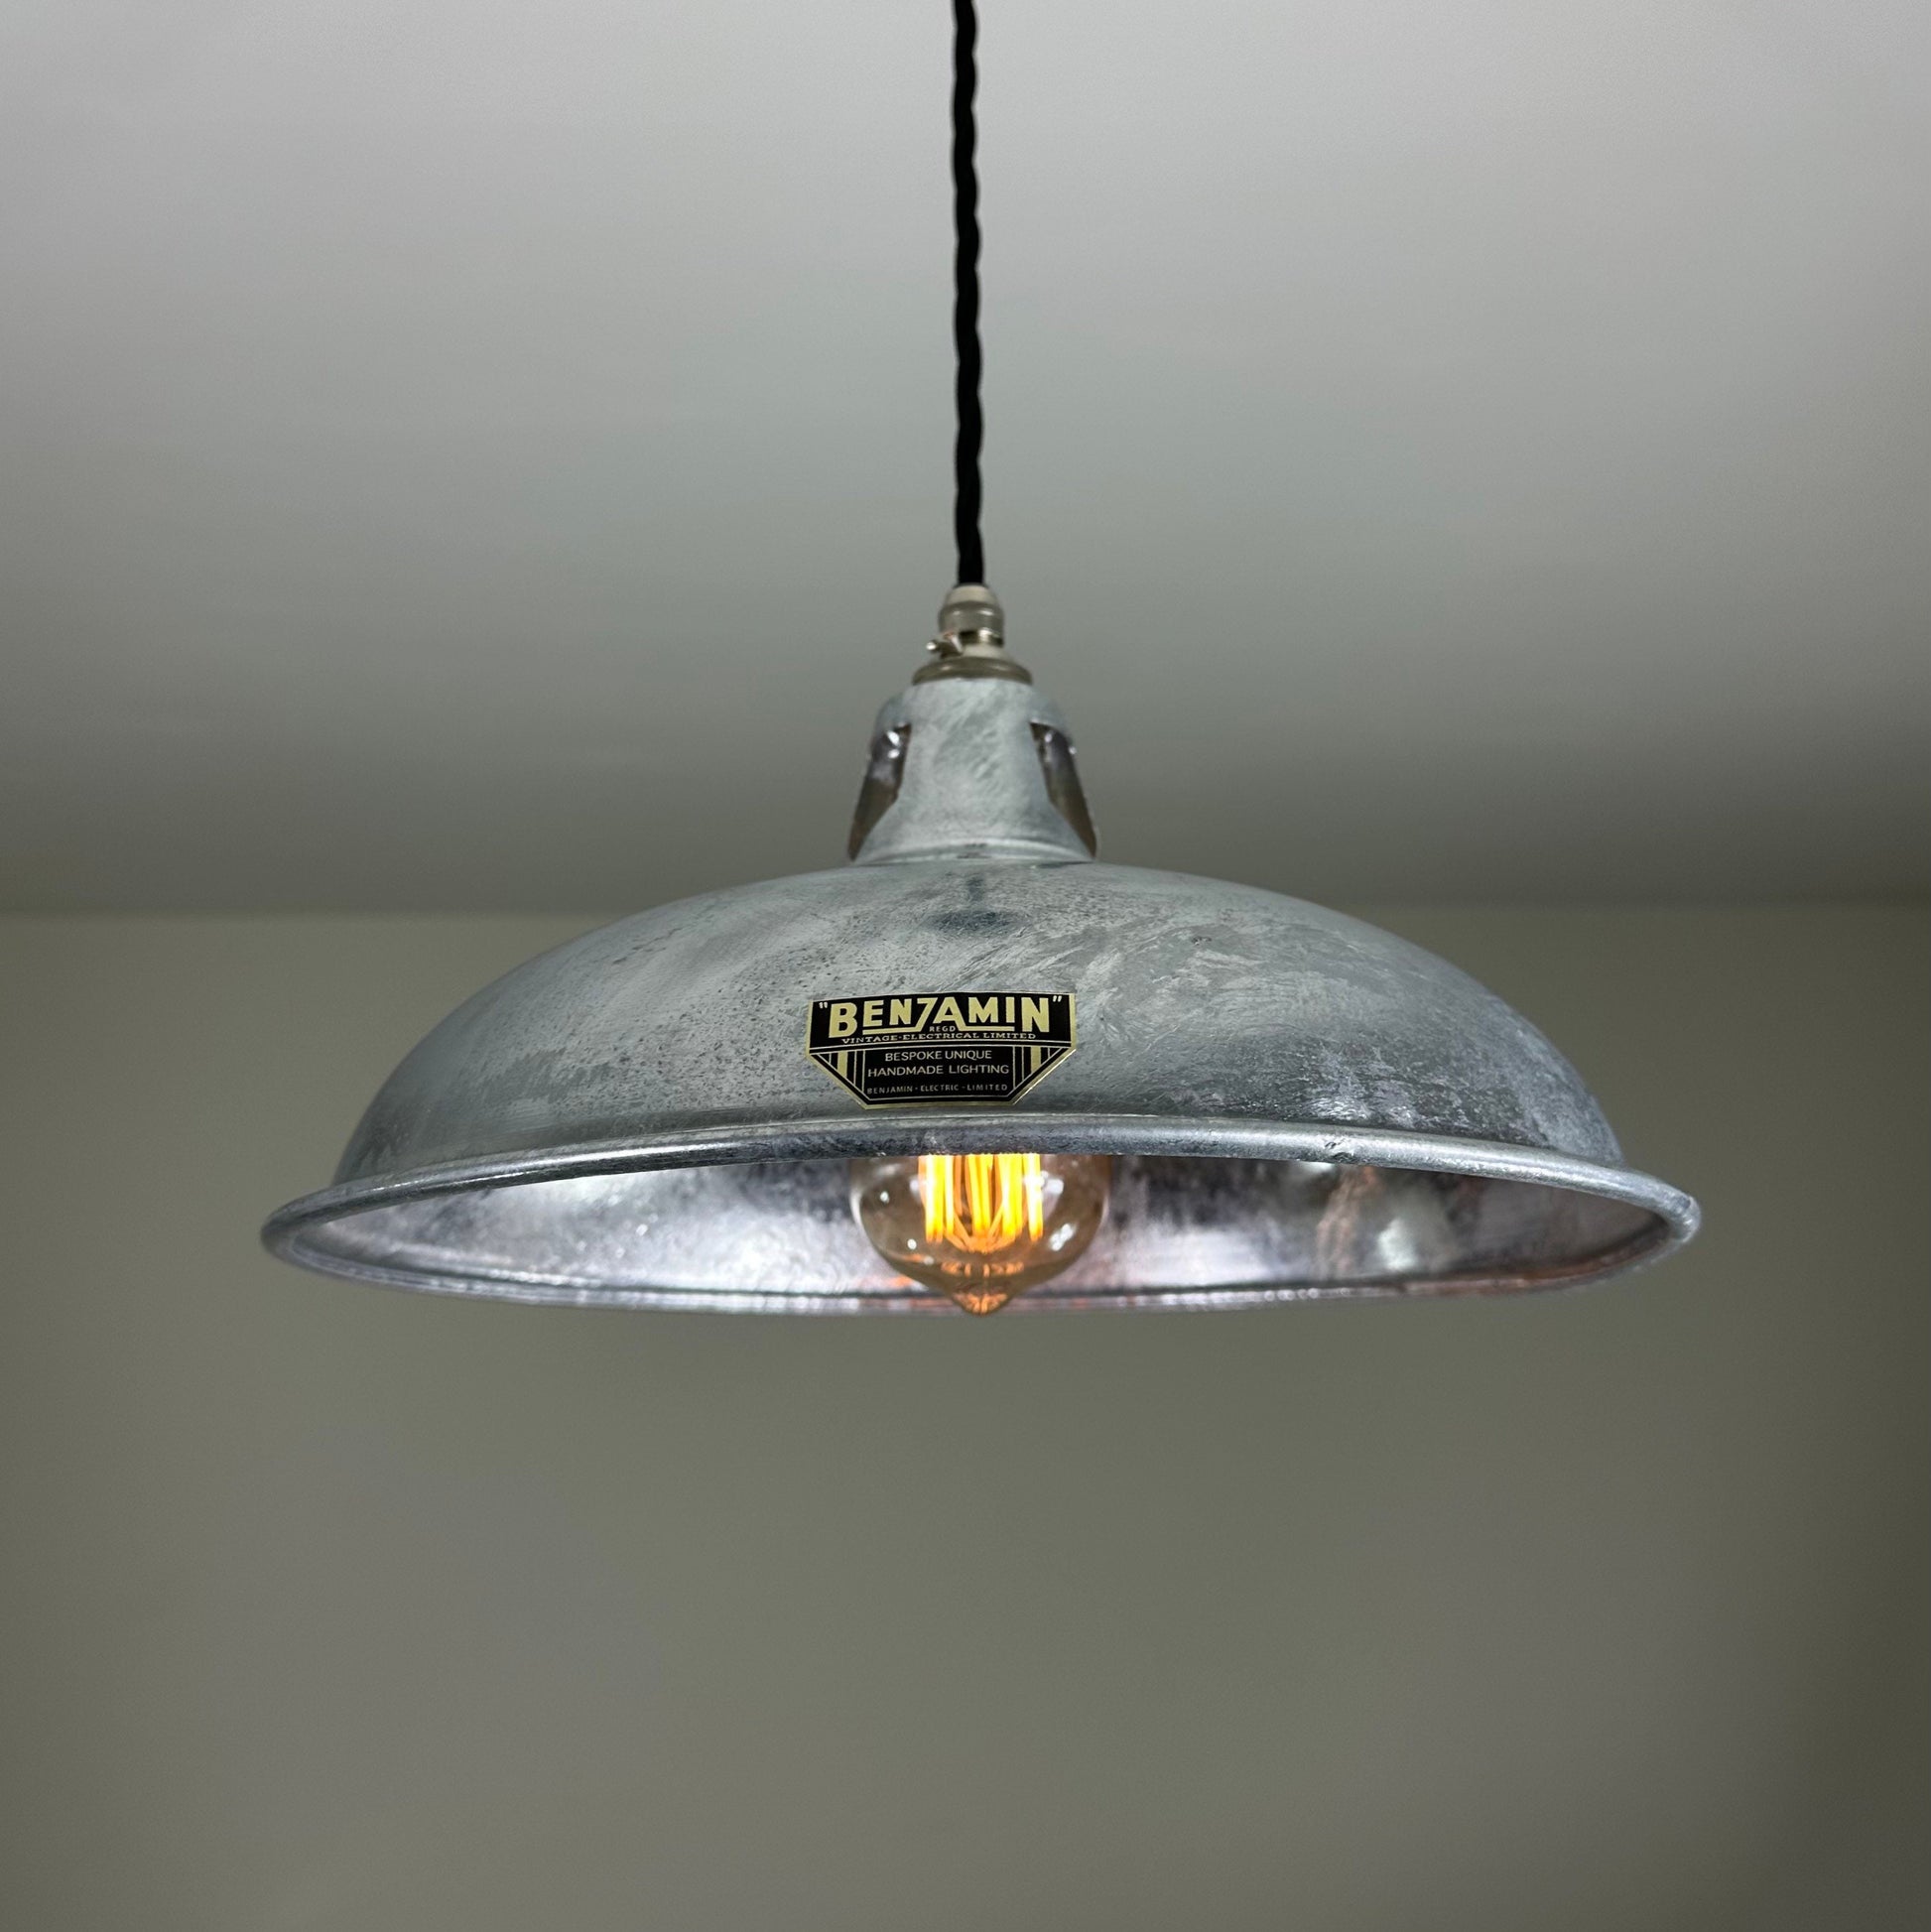 Sedgeford Coolie ~ Galvanised Solid SteeI Industrial Shade Pendant Set Light | Ceiling Dining Room | Kitchen Table | Vintage Filament Bulb